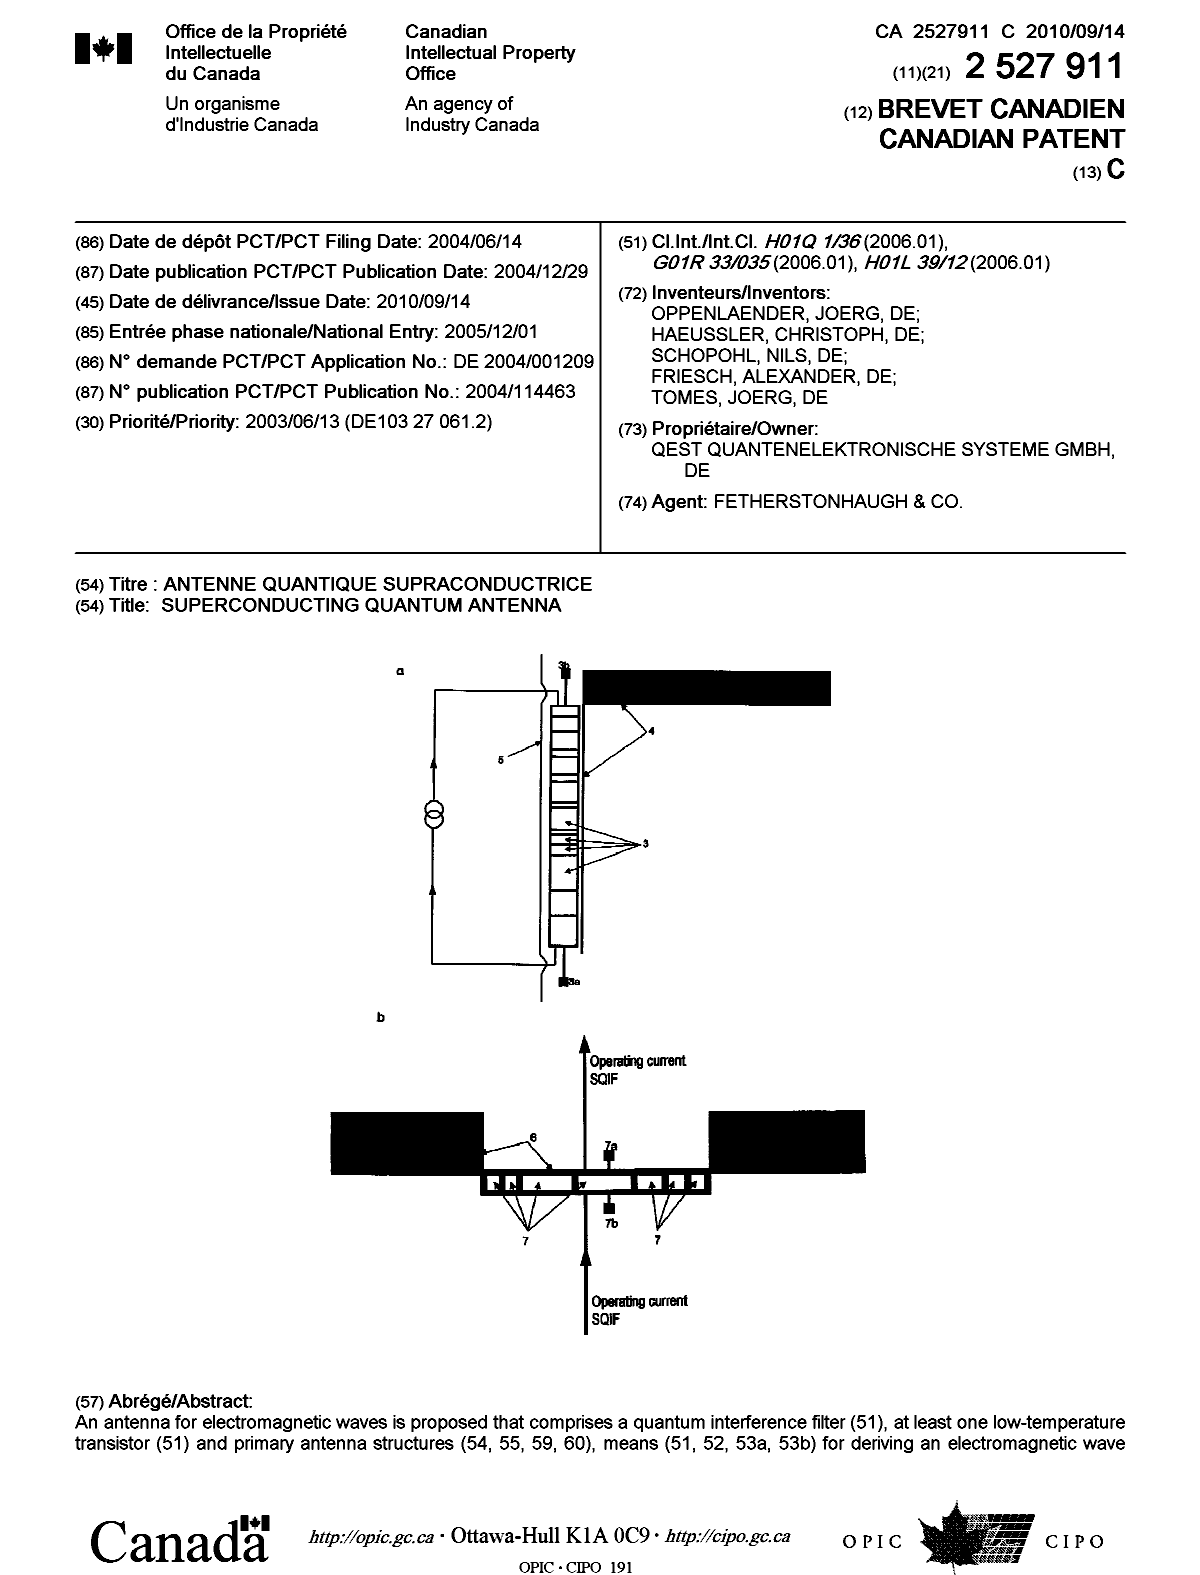 Canadian Patent Document 2527911. Cover Page 20100826. Image 1 of 2